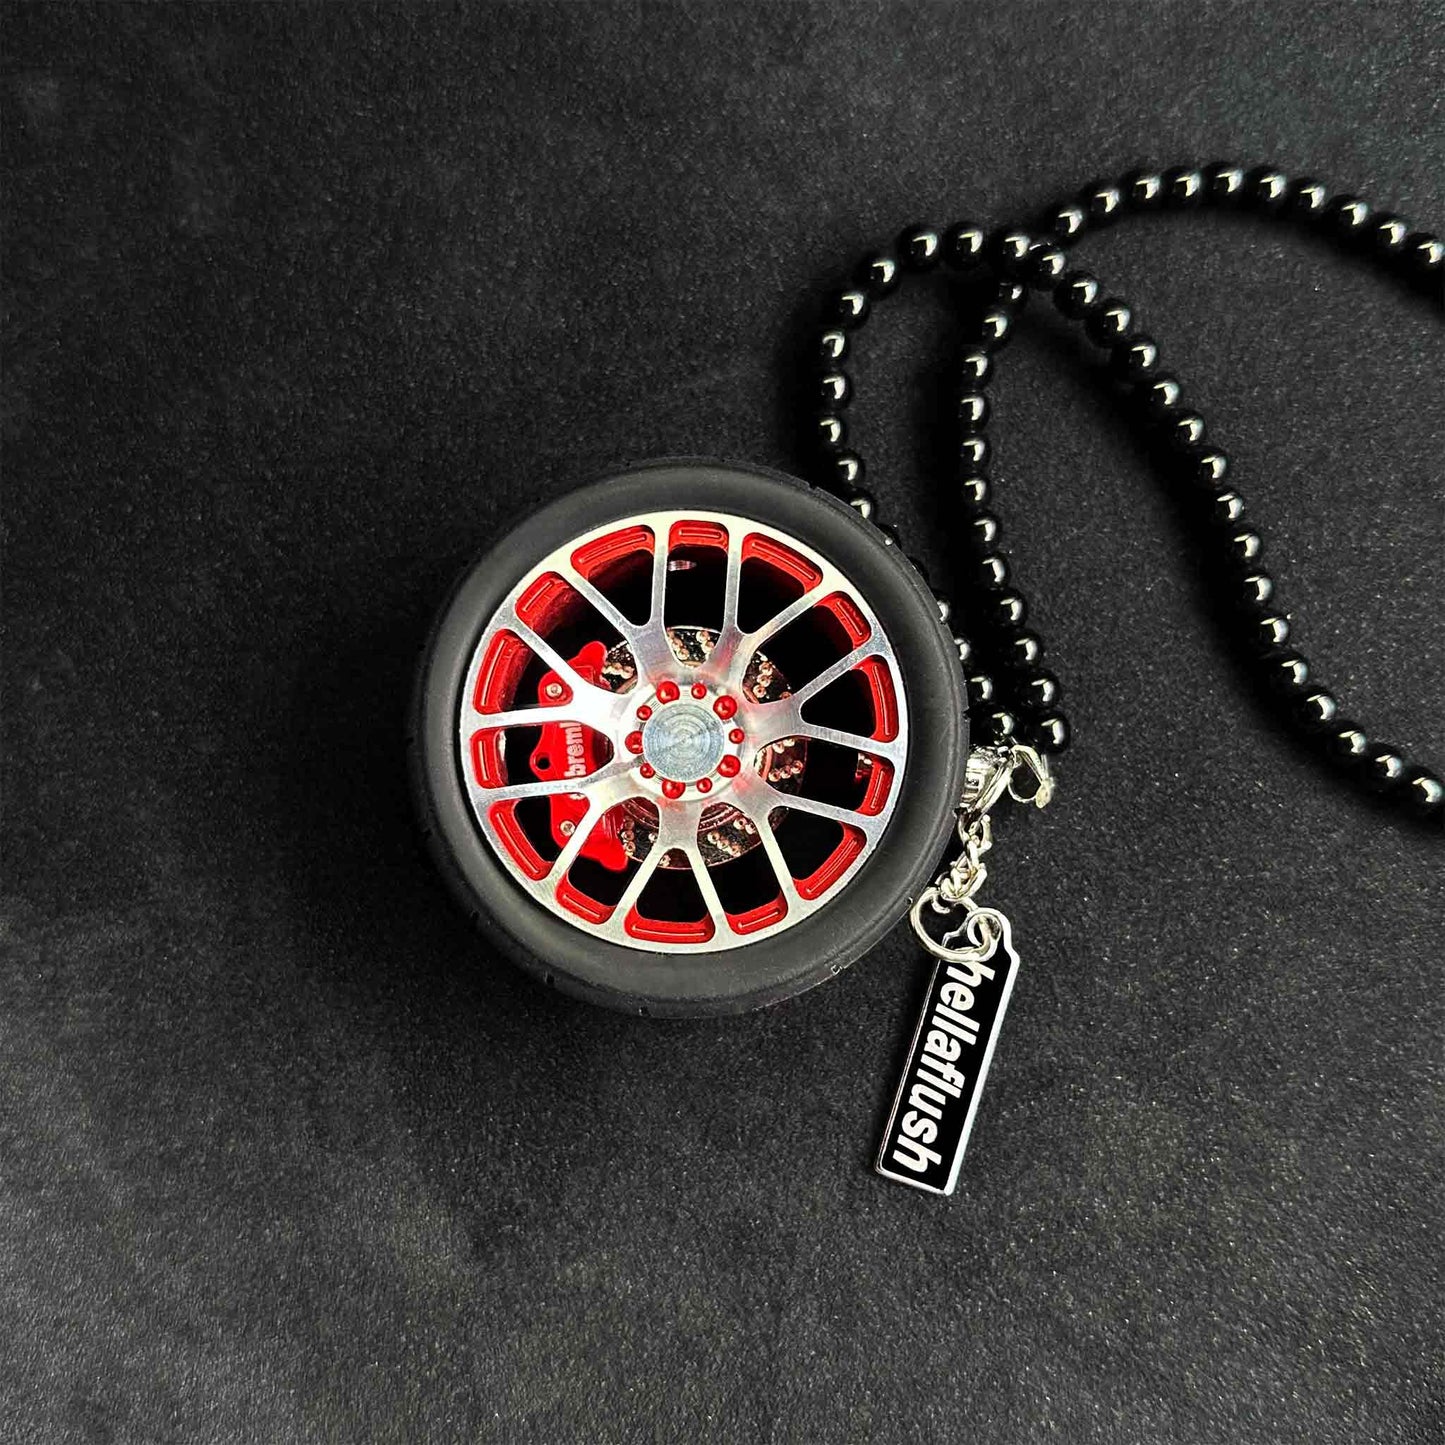 A red BBS wheel air-freshener placed on a black background